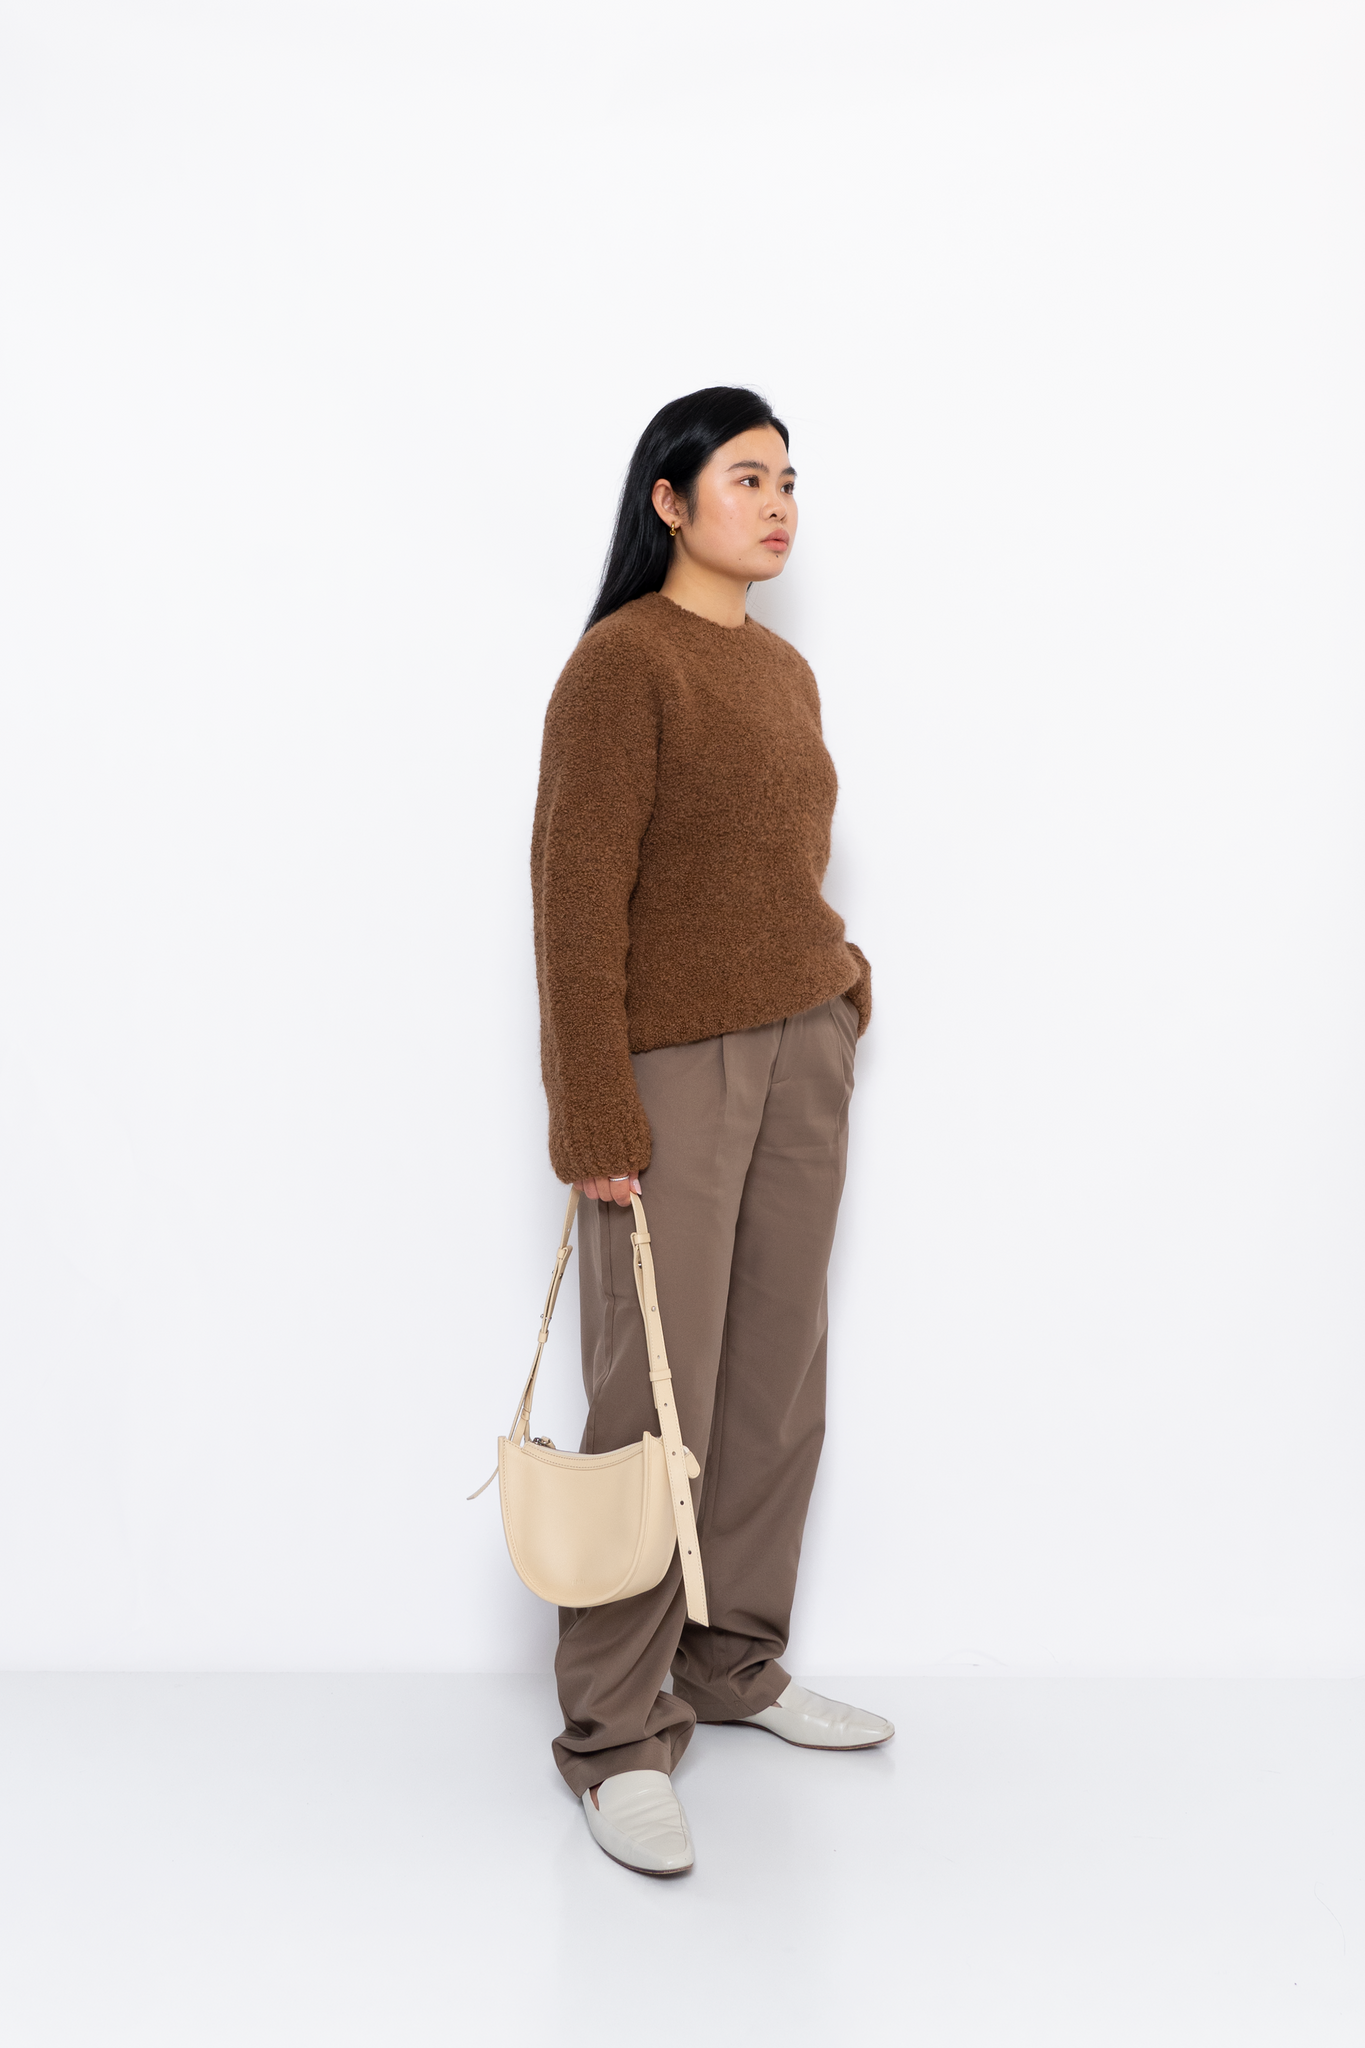 NOTHING WRITTEN SOMME BOUCLE ROUND SLEEVE KNIT CAMEL